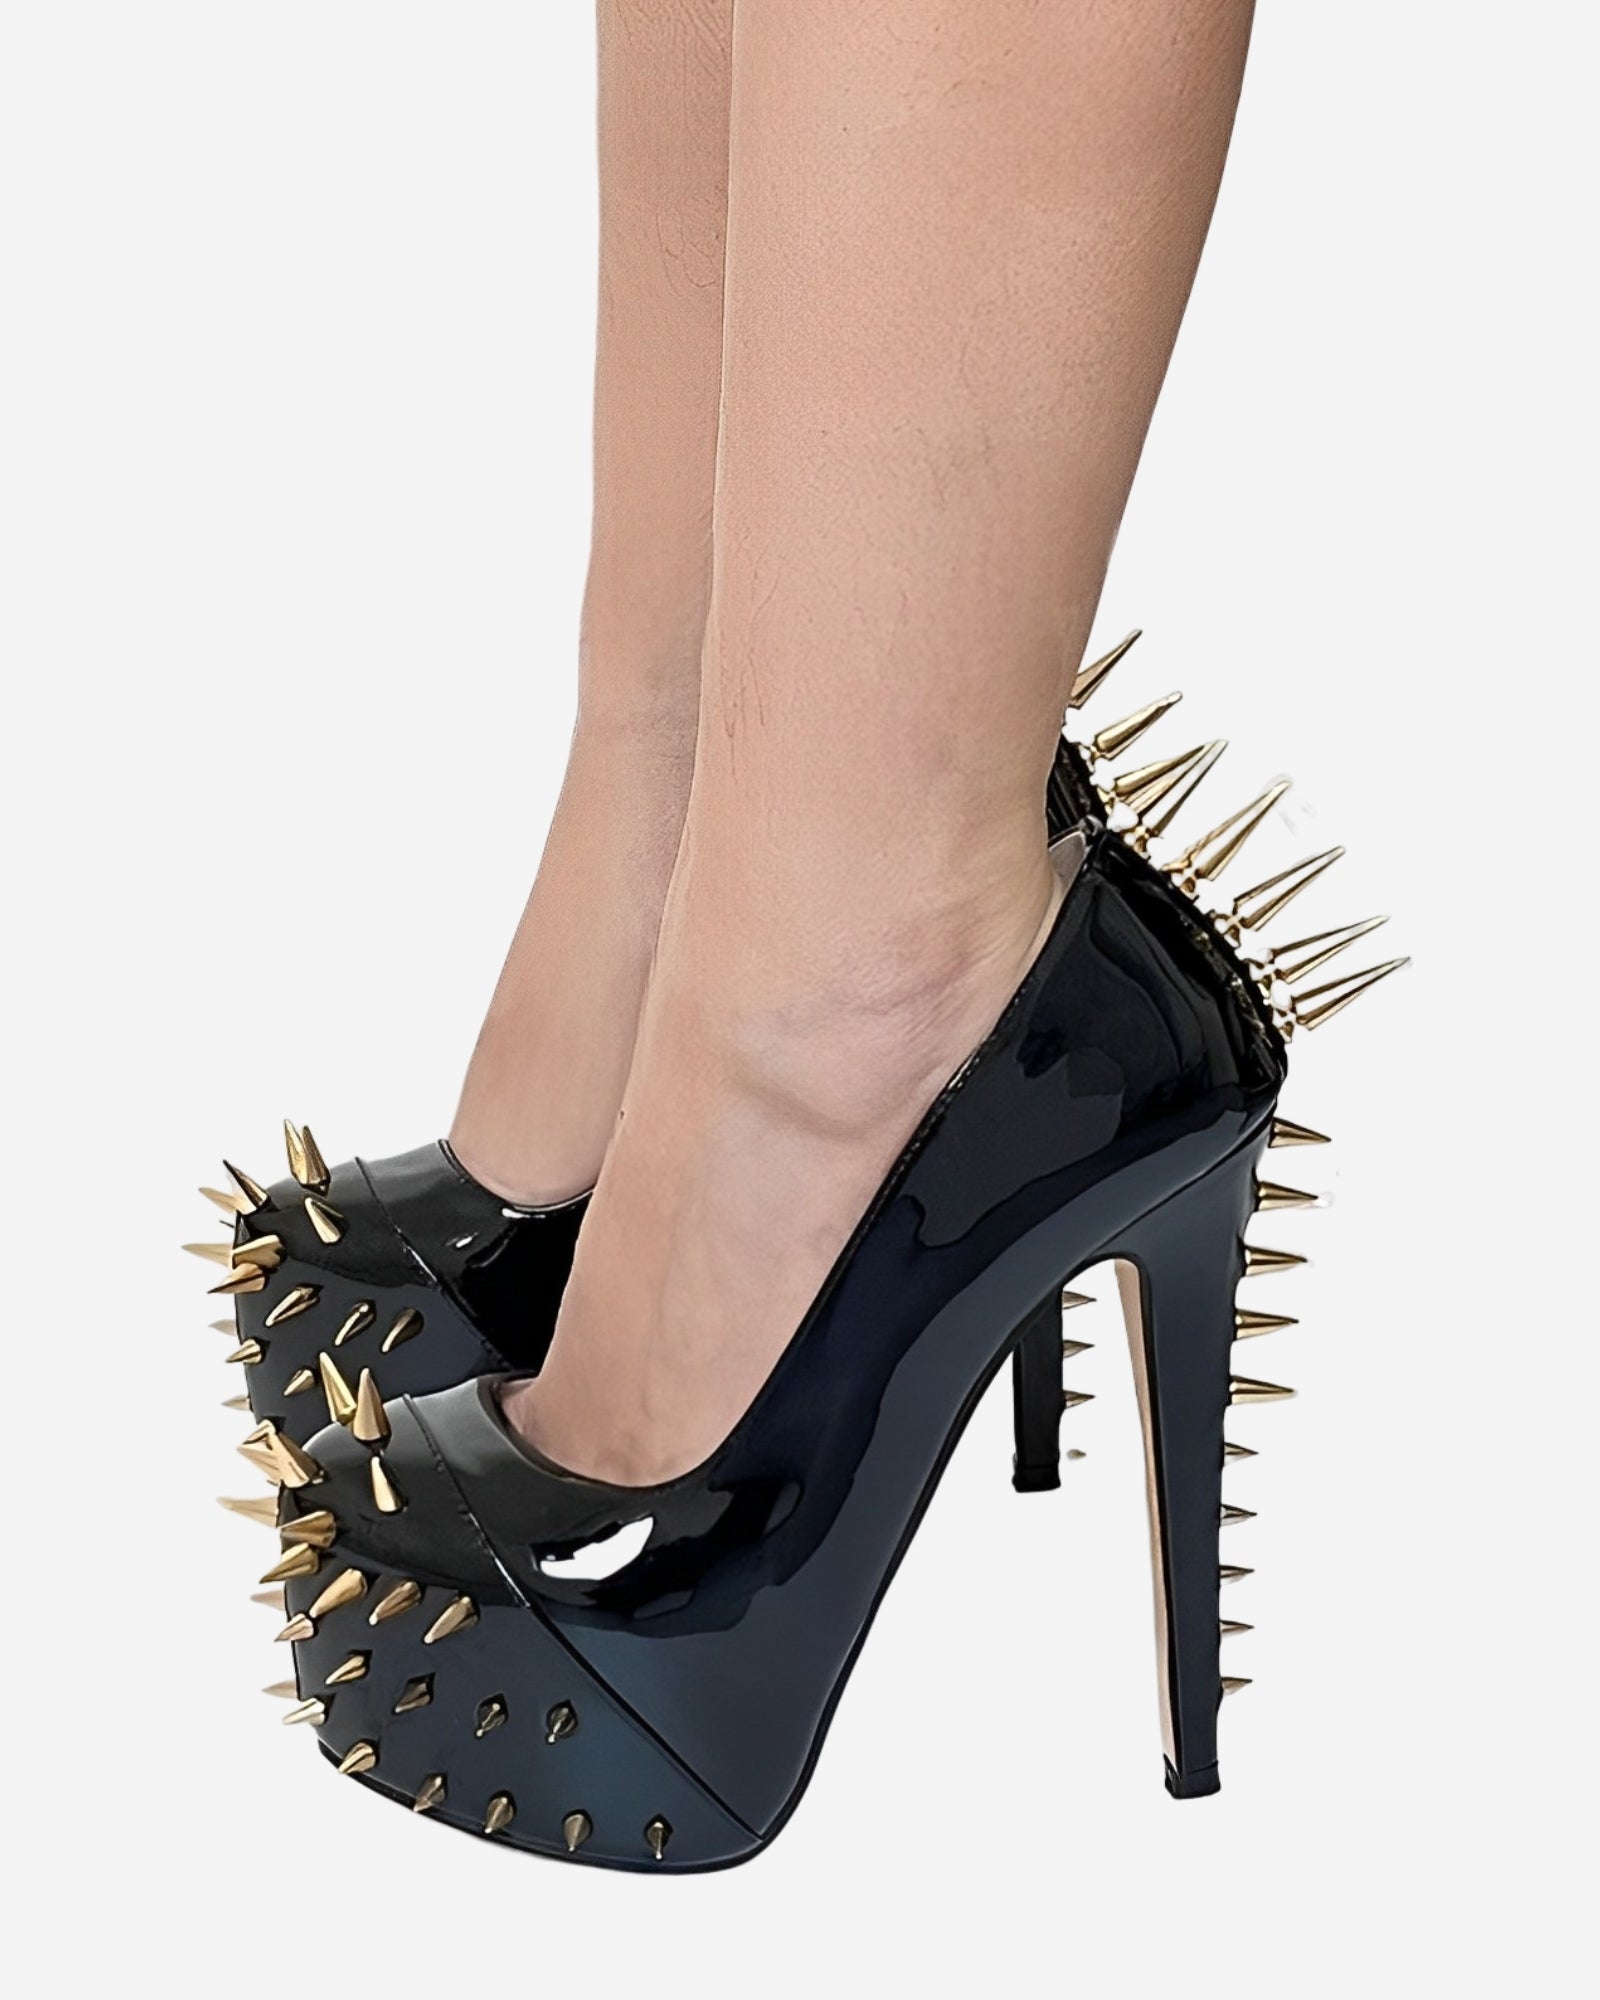 HIGH-HEEL SHOES WITH BUCKLED STRAPS - Black | ZARA India